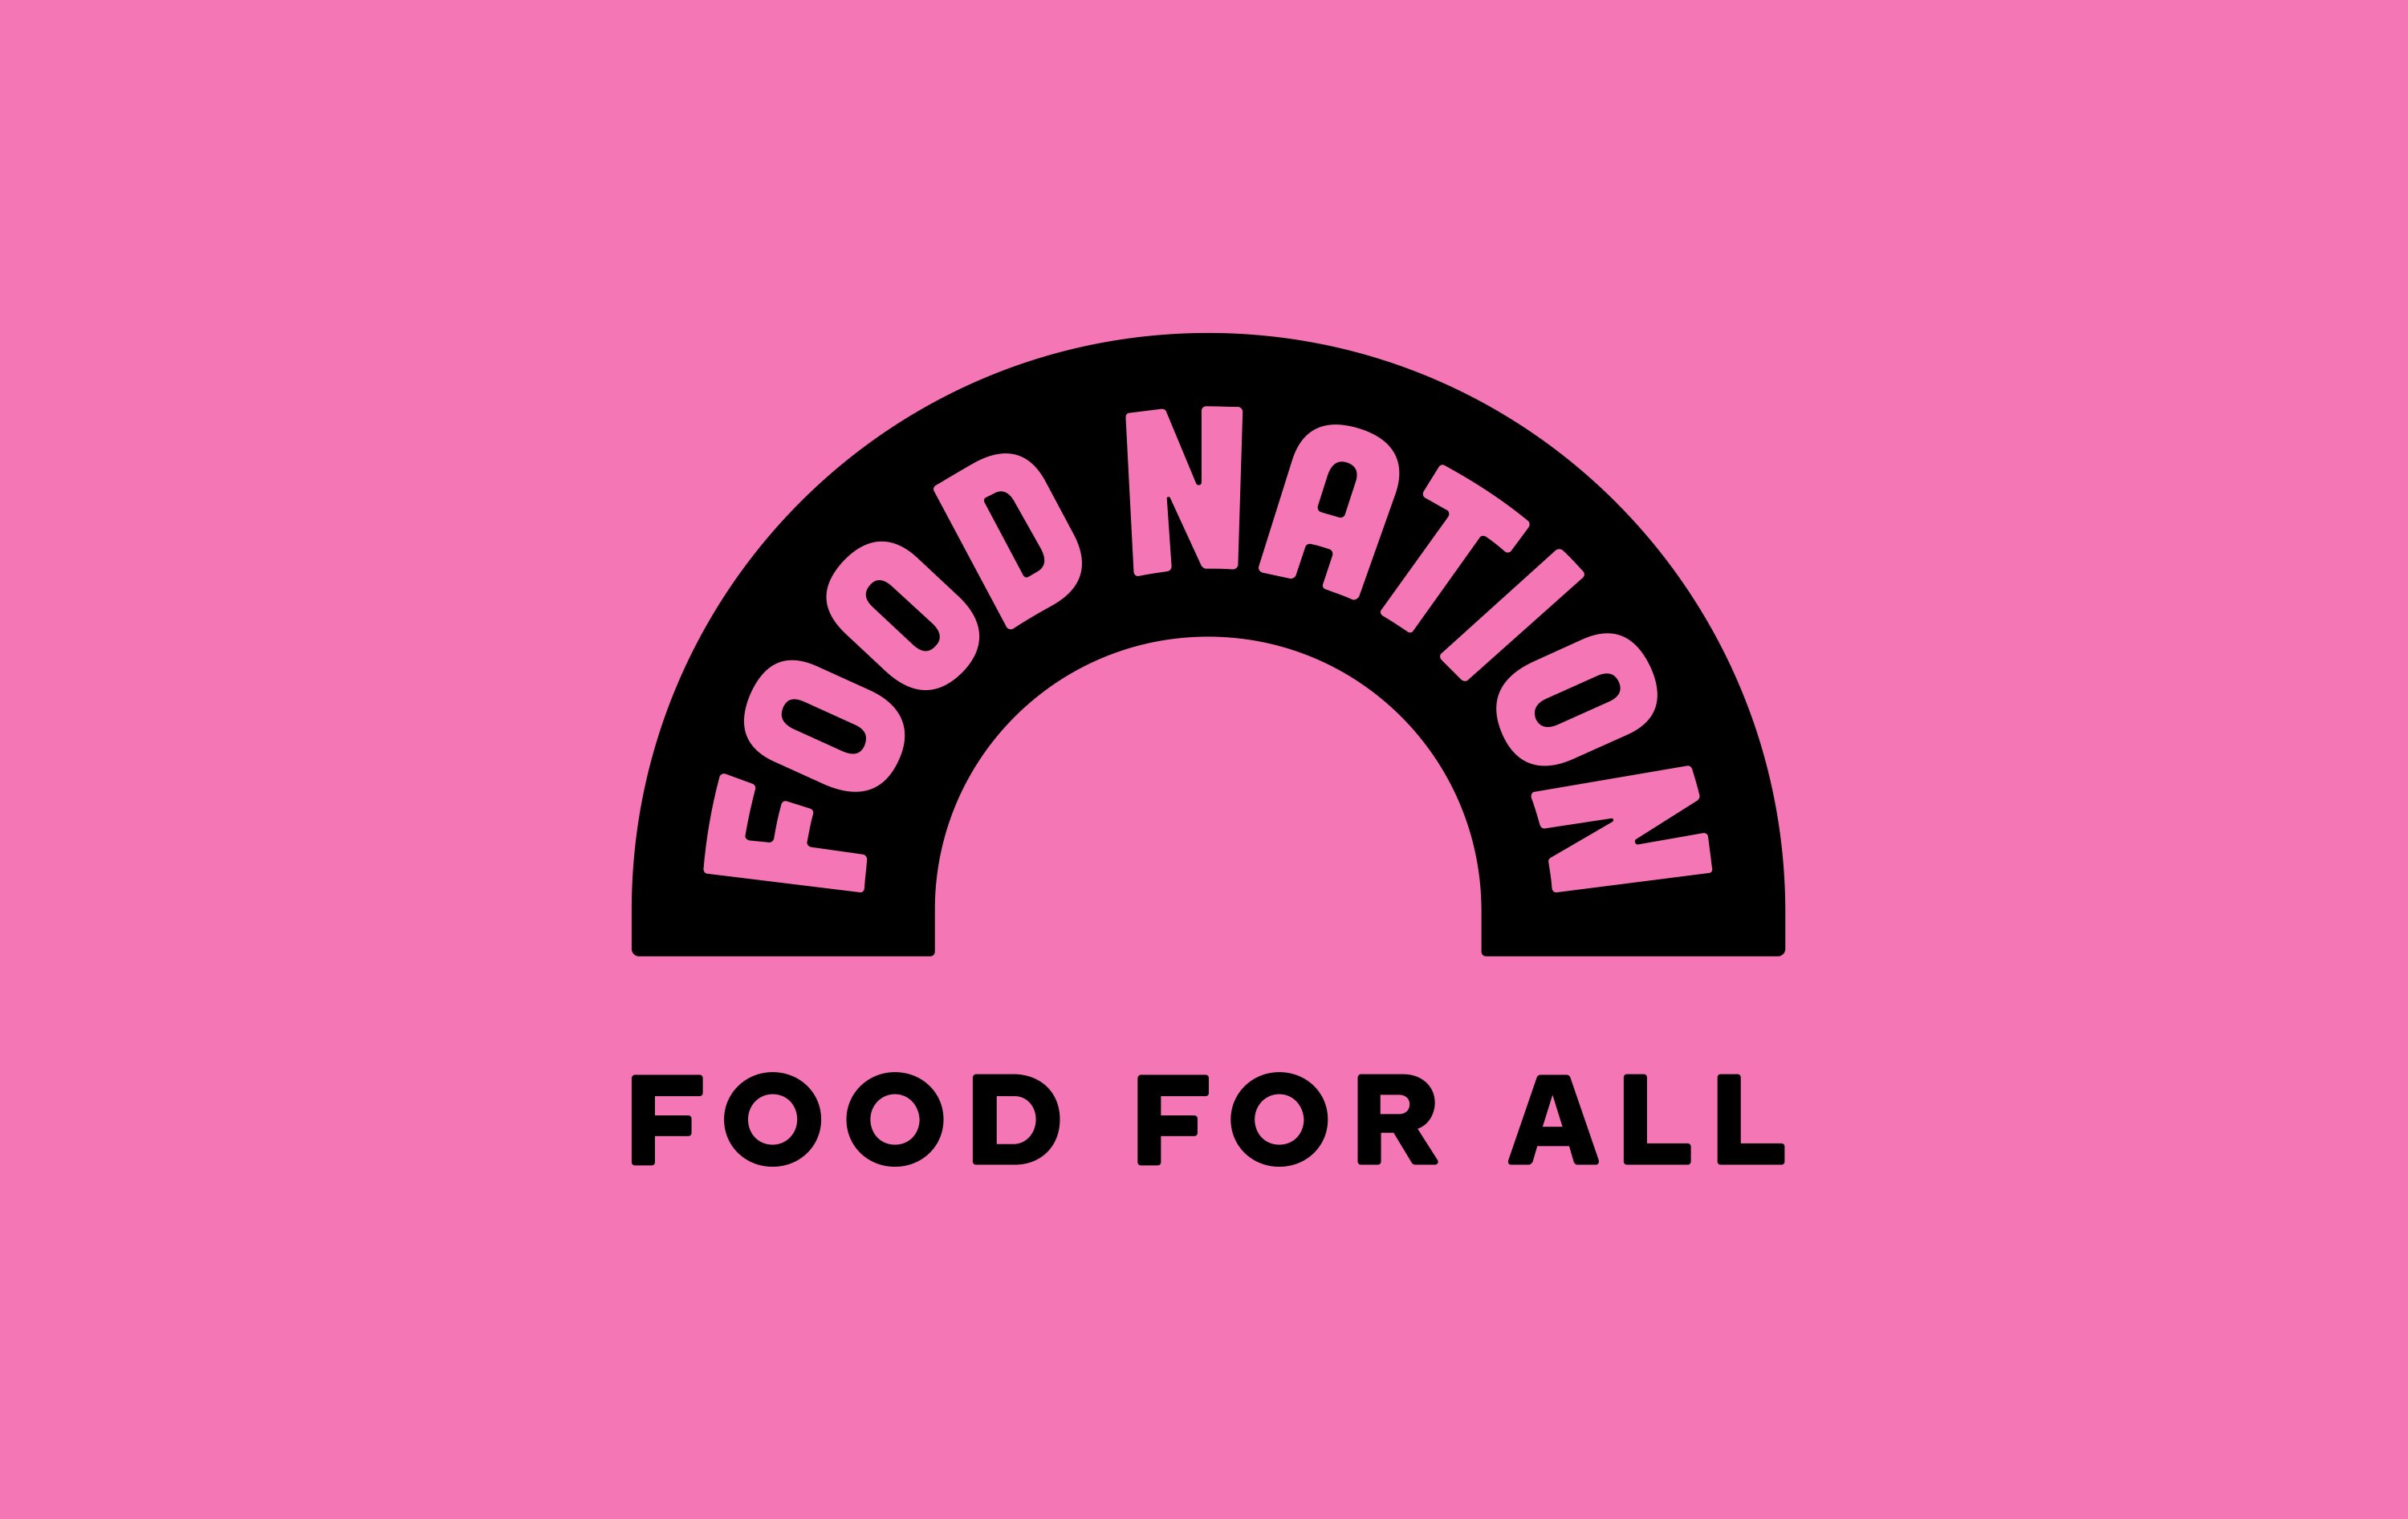 Logo for plant-based food brand Food Nation by New Zealand studio Seachange 